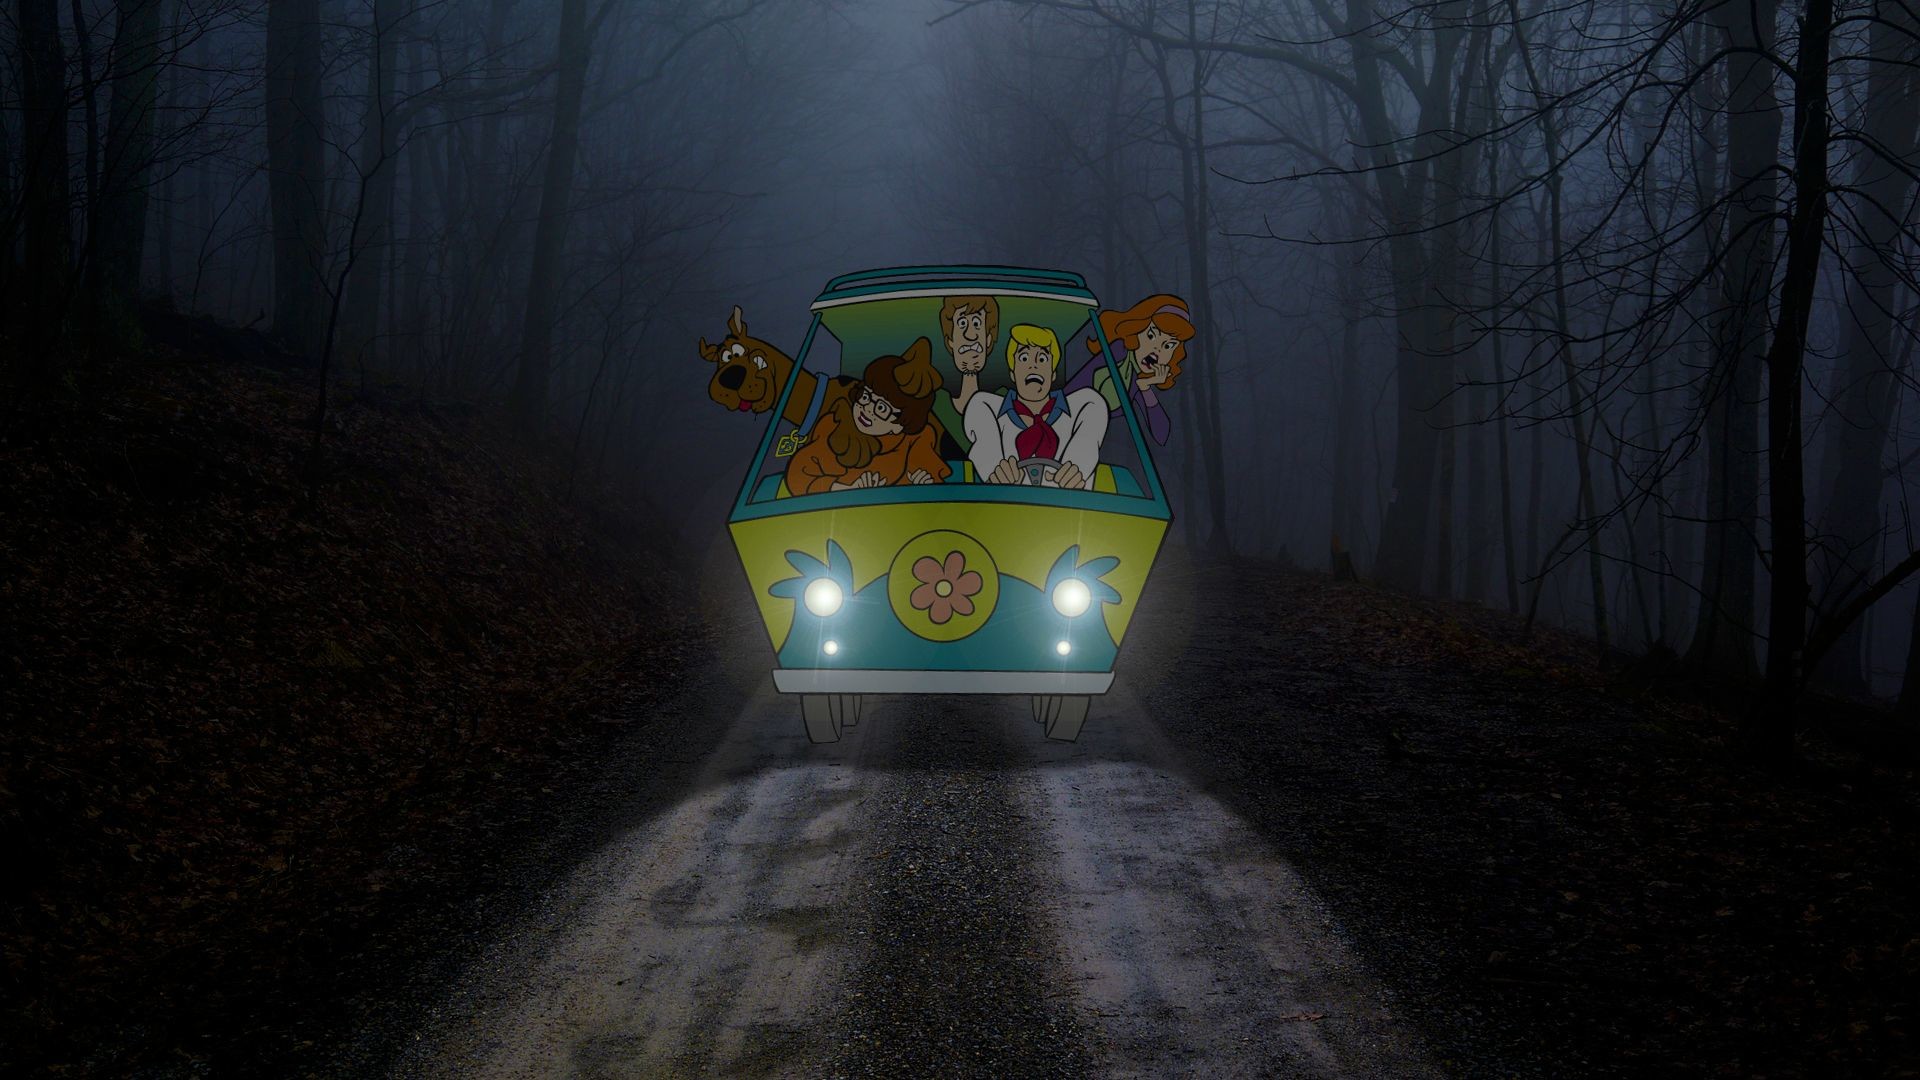 1920x1080 Scooby doo Characters Wallpaper for PC 3 